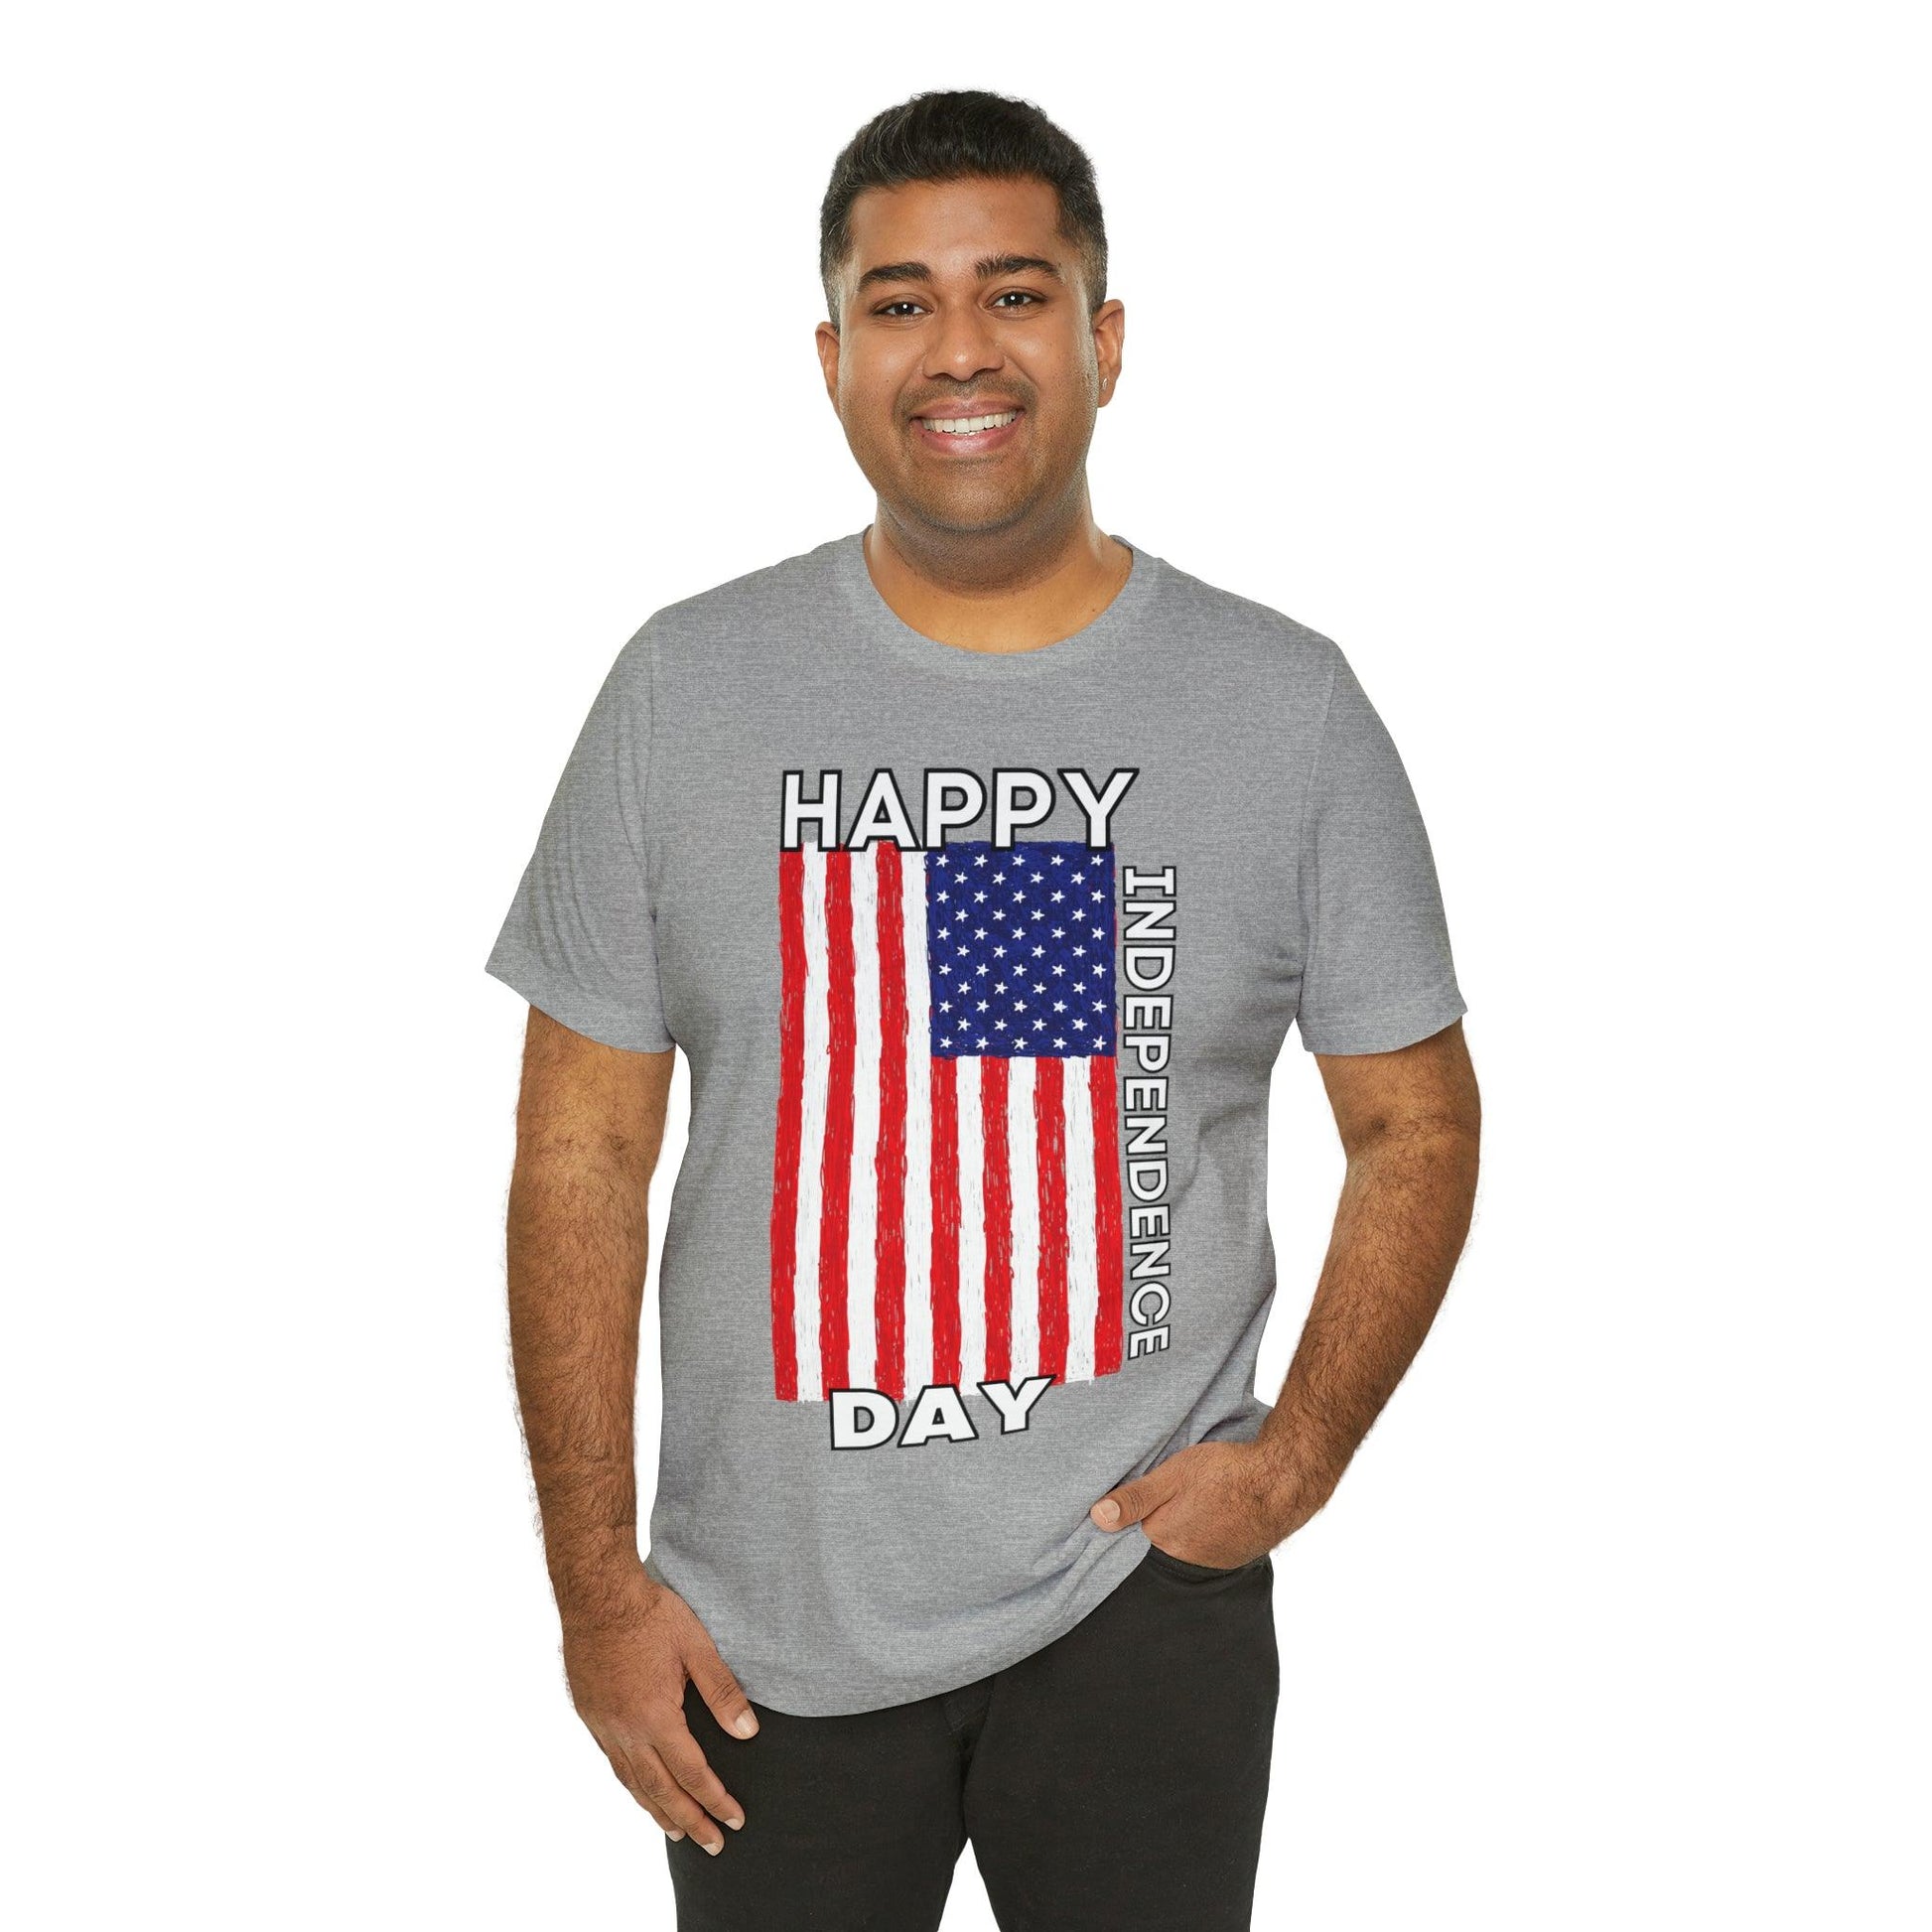 Show Your Patriotism with USA Flag Shirts: Independence Day, Fireworks, Freedom - Perfect for Women and Men on 4th of July - Giftsmojo